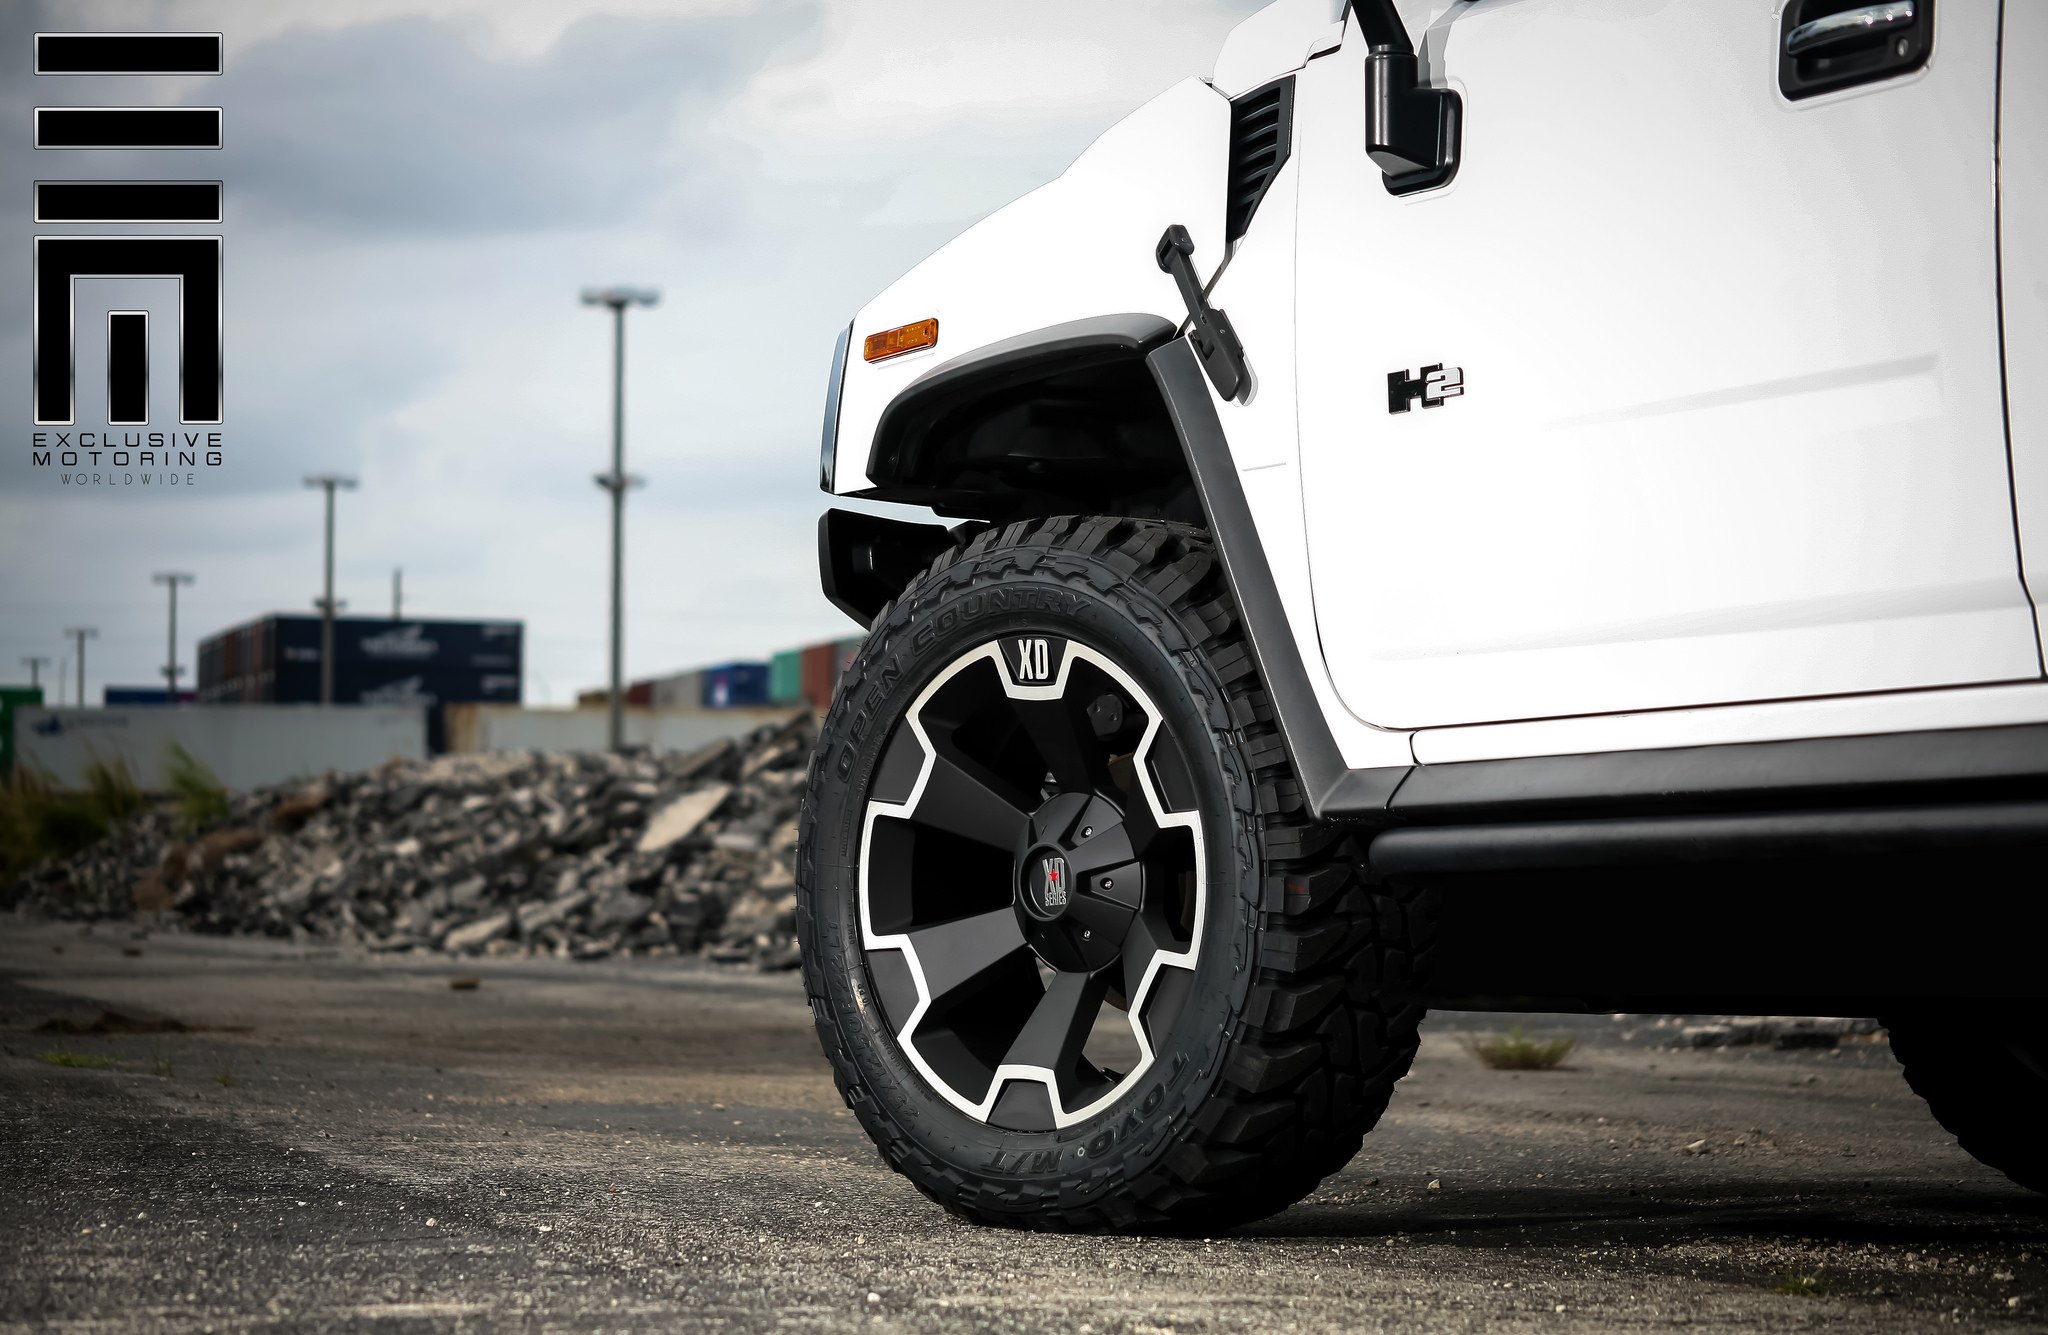 XD Rims on Hummer H2 - Photo by Exclusive Motoring